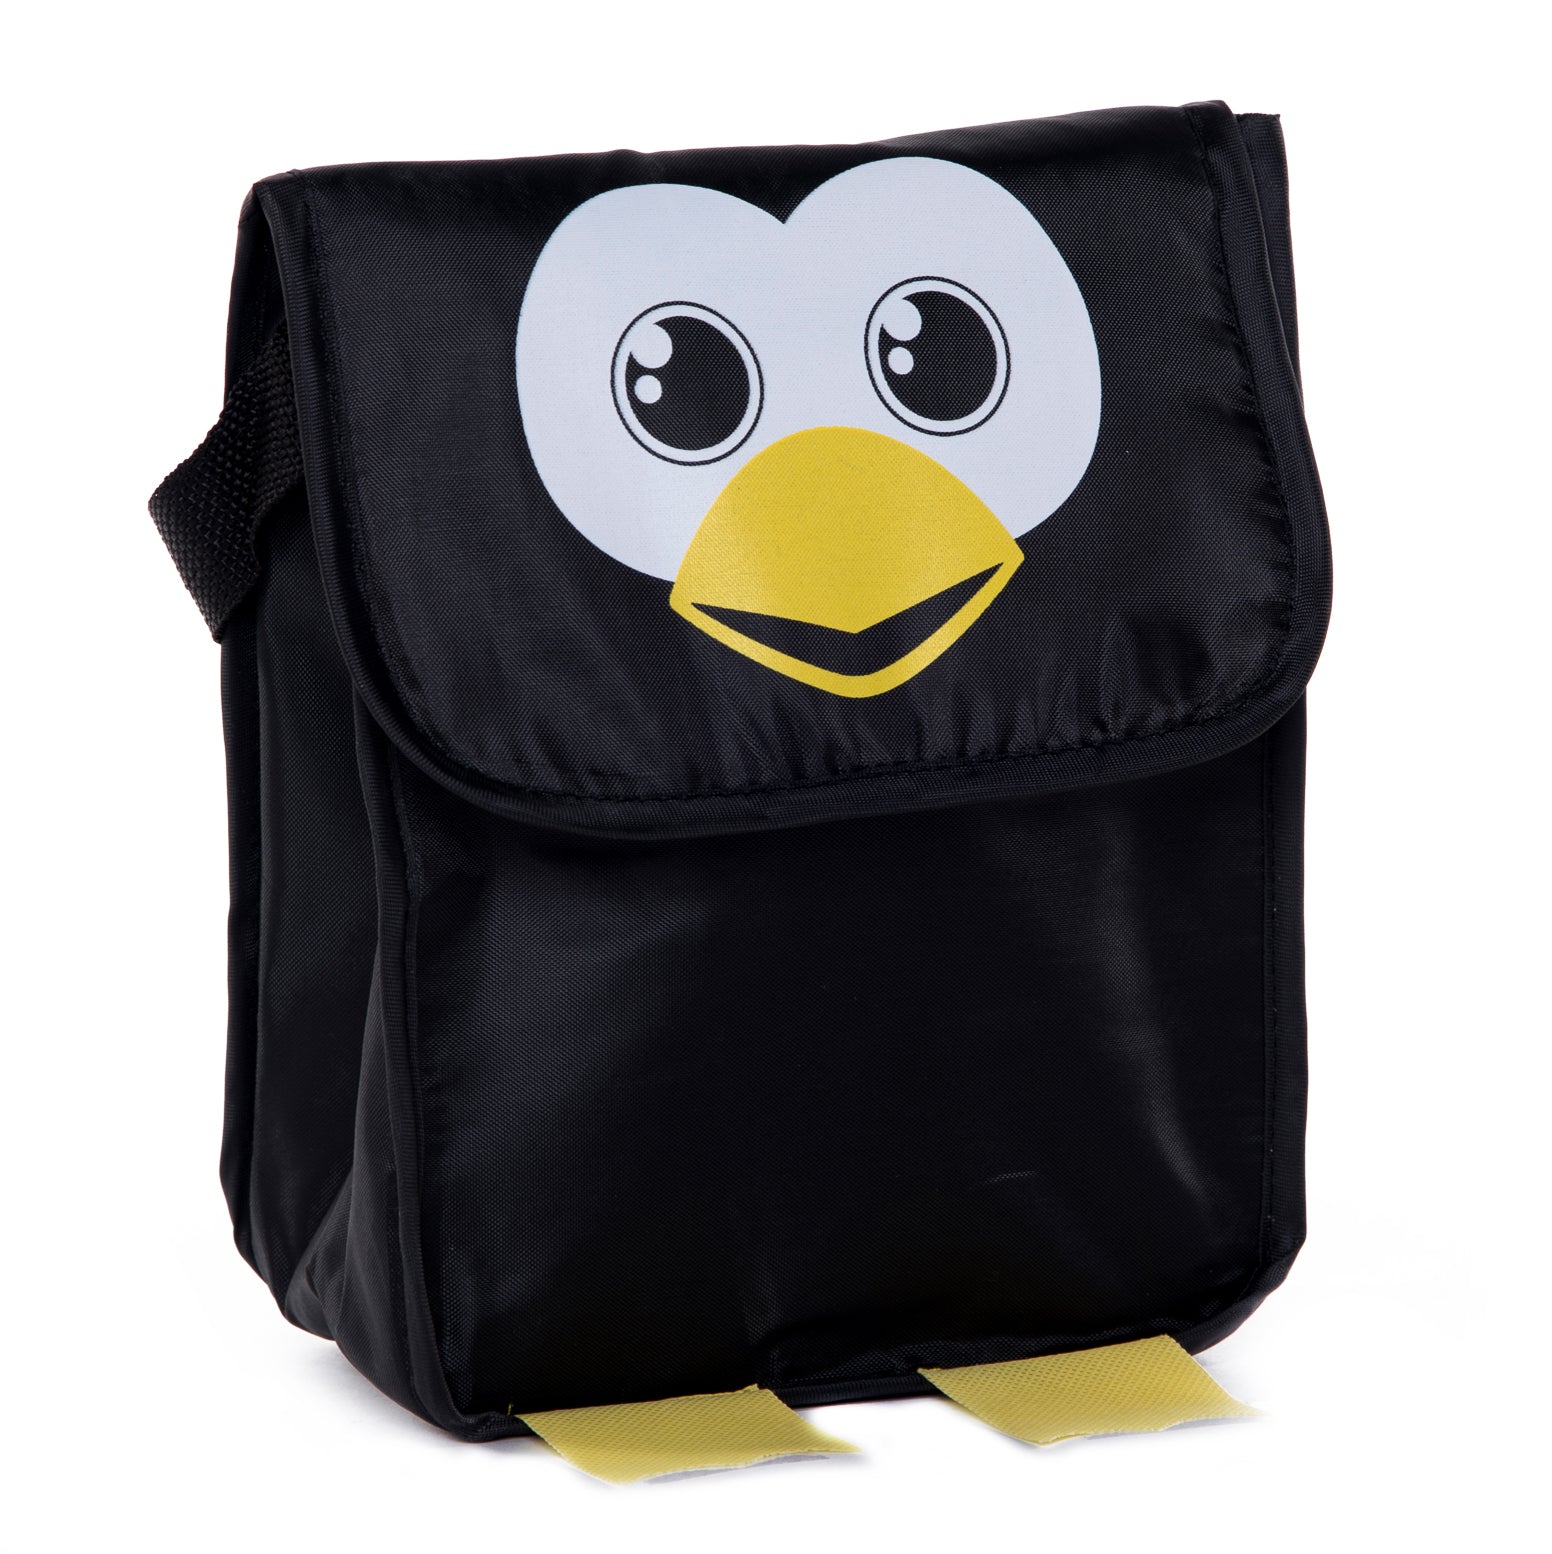 Fun Animal Snack Bag for Kids  Lightweight and insulated Lunch Bag With  Strap 